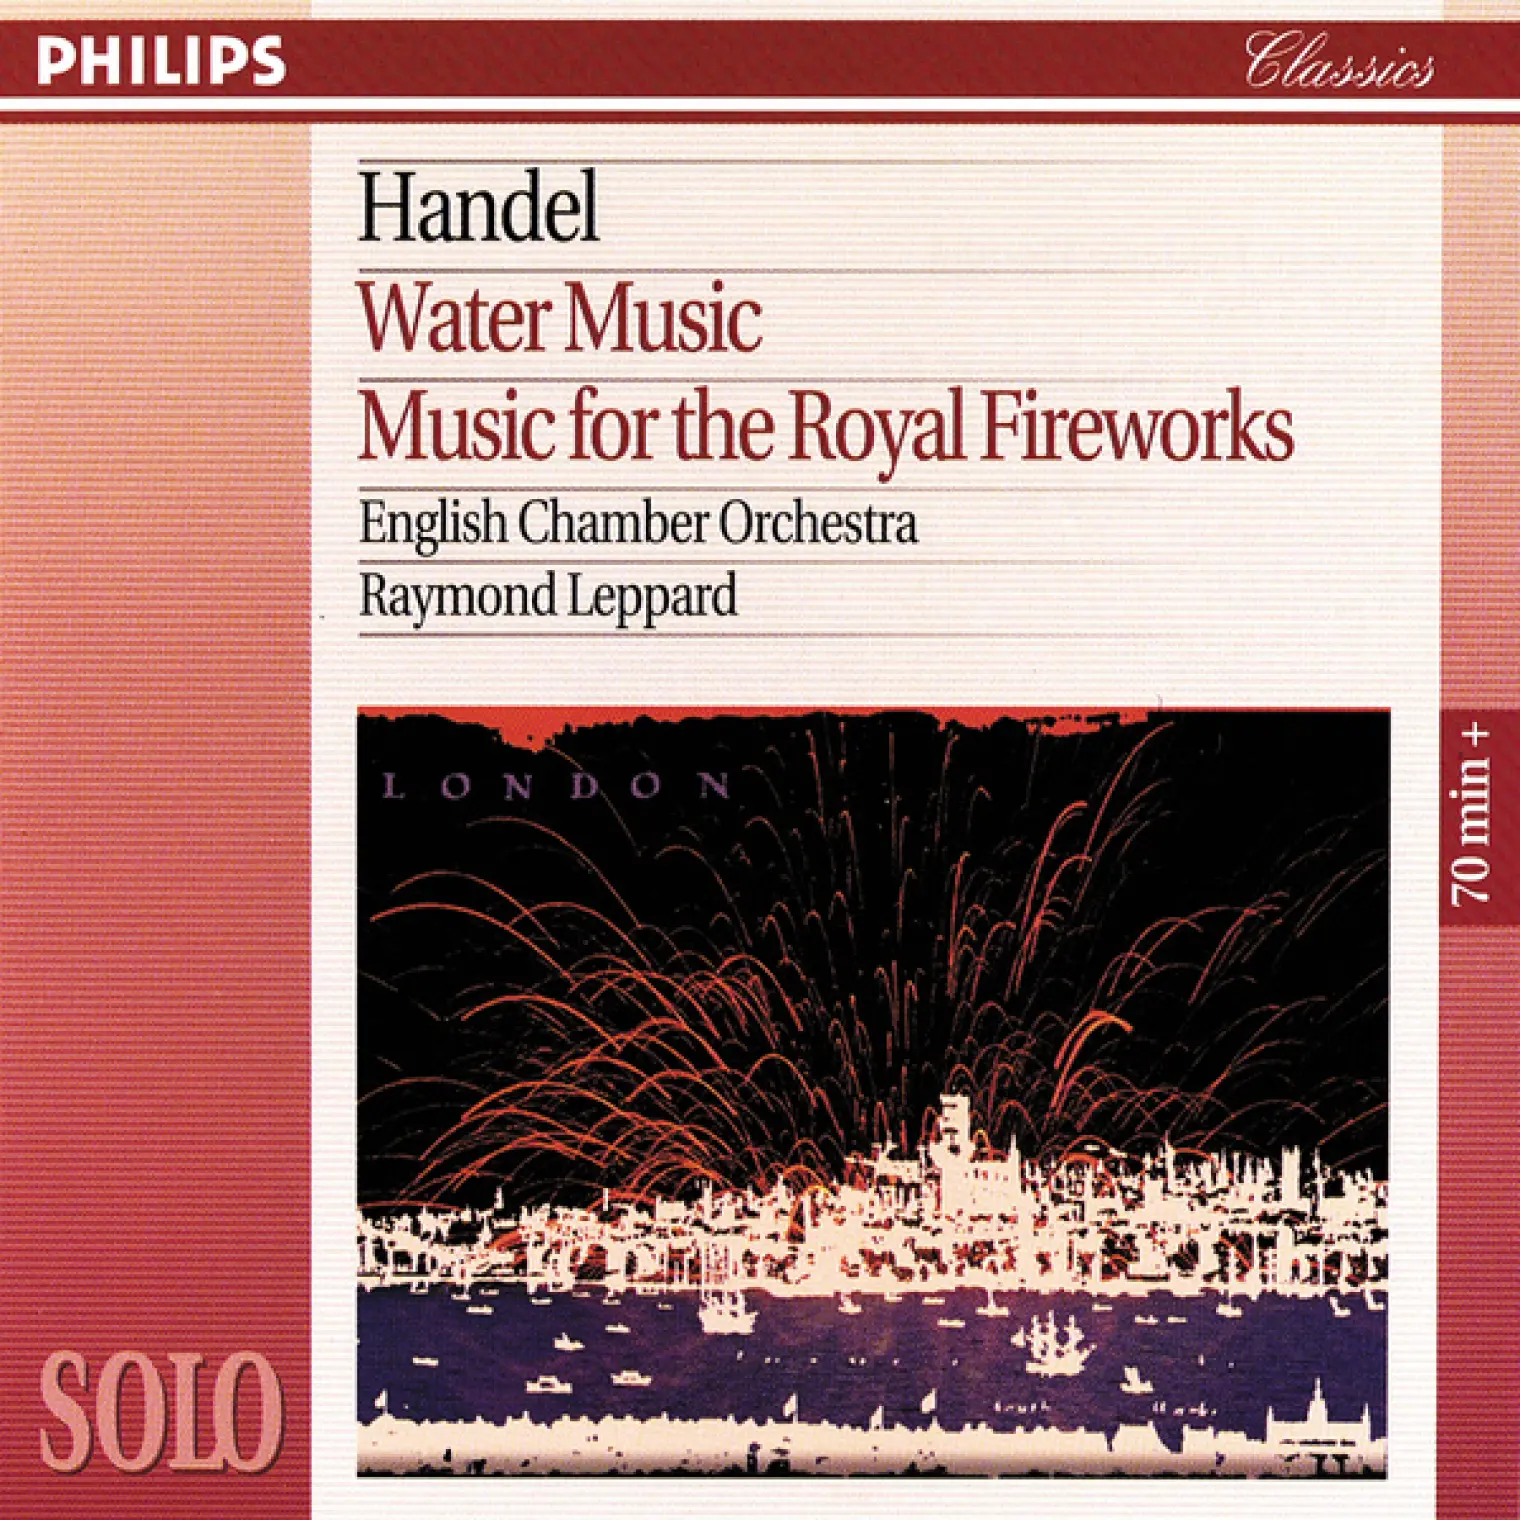 Handel: Water Music/Music for the Royal Fireworks -  English Chamber Orchestra 